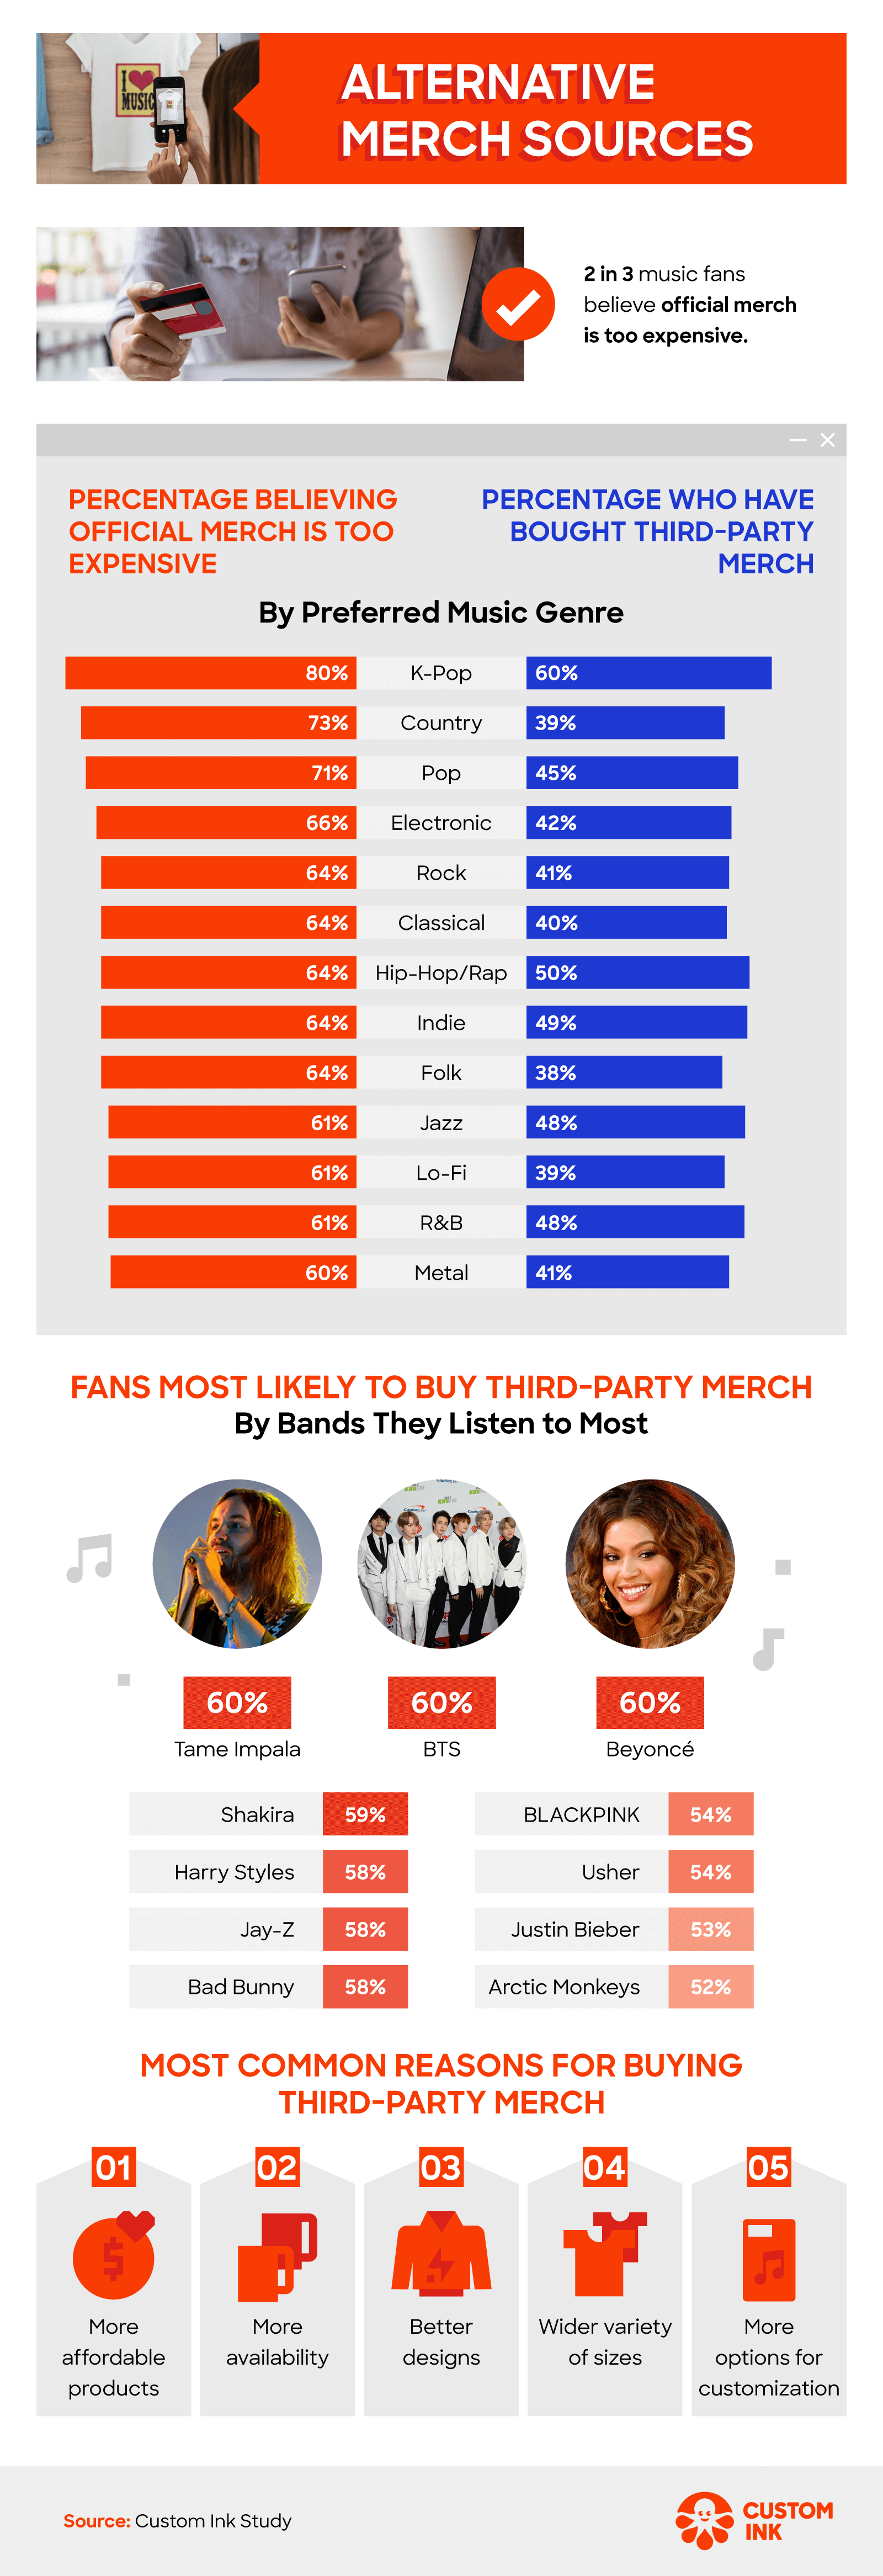 Graphic showing why music fans buy third party merch